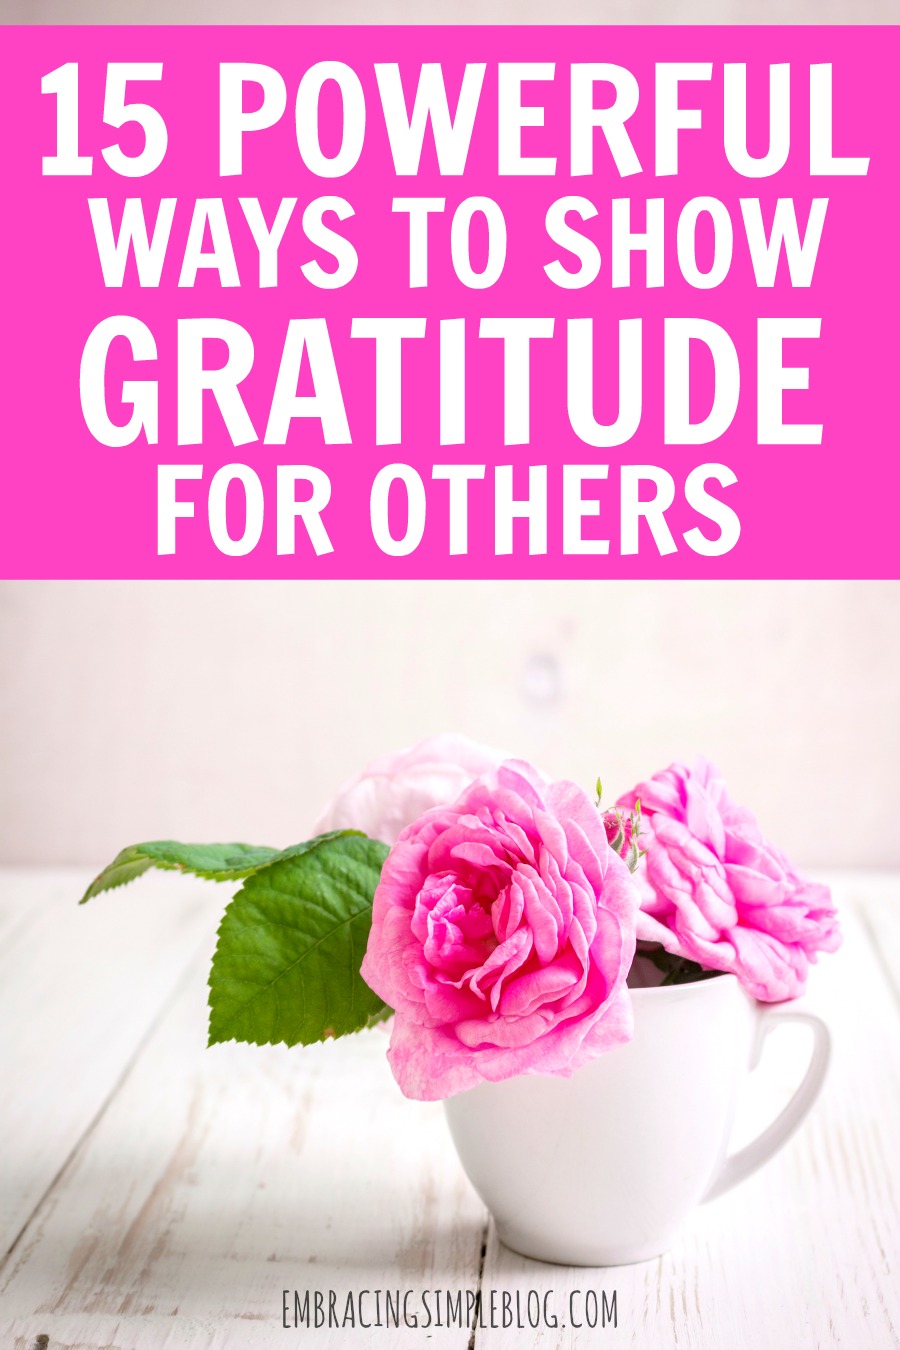 Showing gratitude for others seems to be something that happens less and less in today's world filled with too many screens and not enough face-to-face time. Click to read 15 easy, yet powerful ways to show gratitude for others!